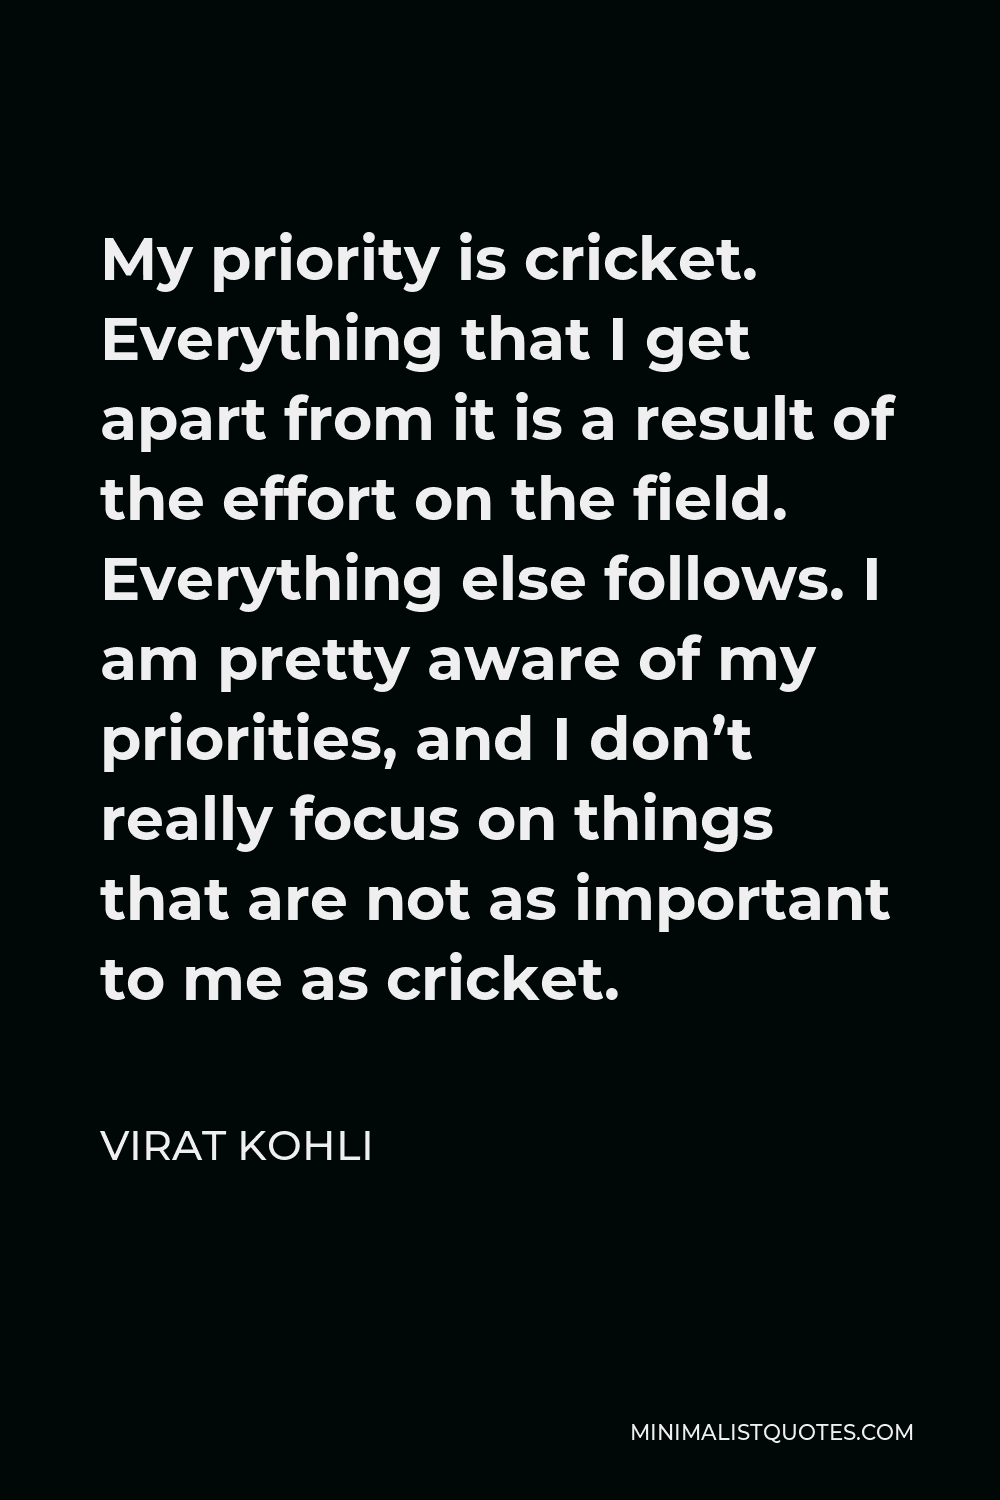 Virat Kohli Quote - My priority is cricket. Everything that I get apart from it is a result of the effort on the field. Everything else follows. I am pretty aware of my priorities, and I don’t really focus on things that are not as important to me as cricket.